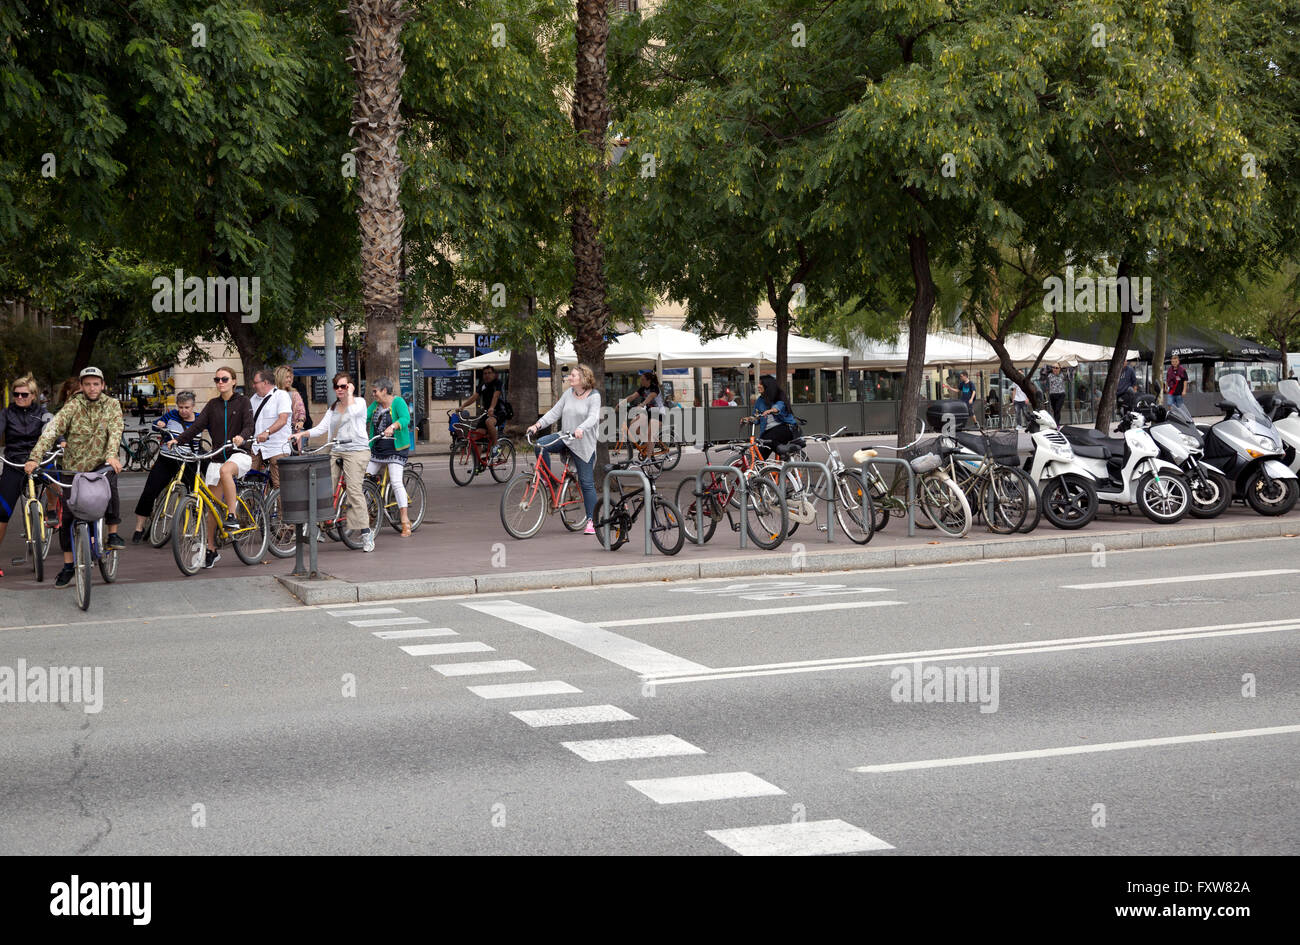 People, tourists, locals on bicycles waiting for traffic light to cross street in Barcelona Spain. Stock Photo